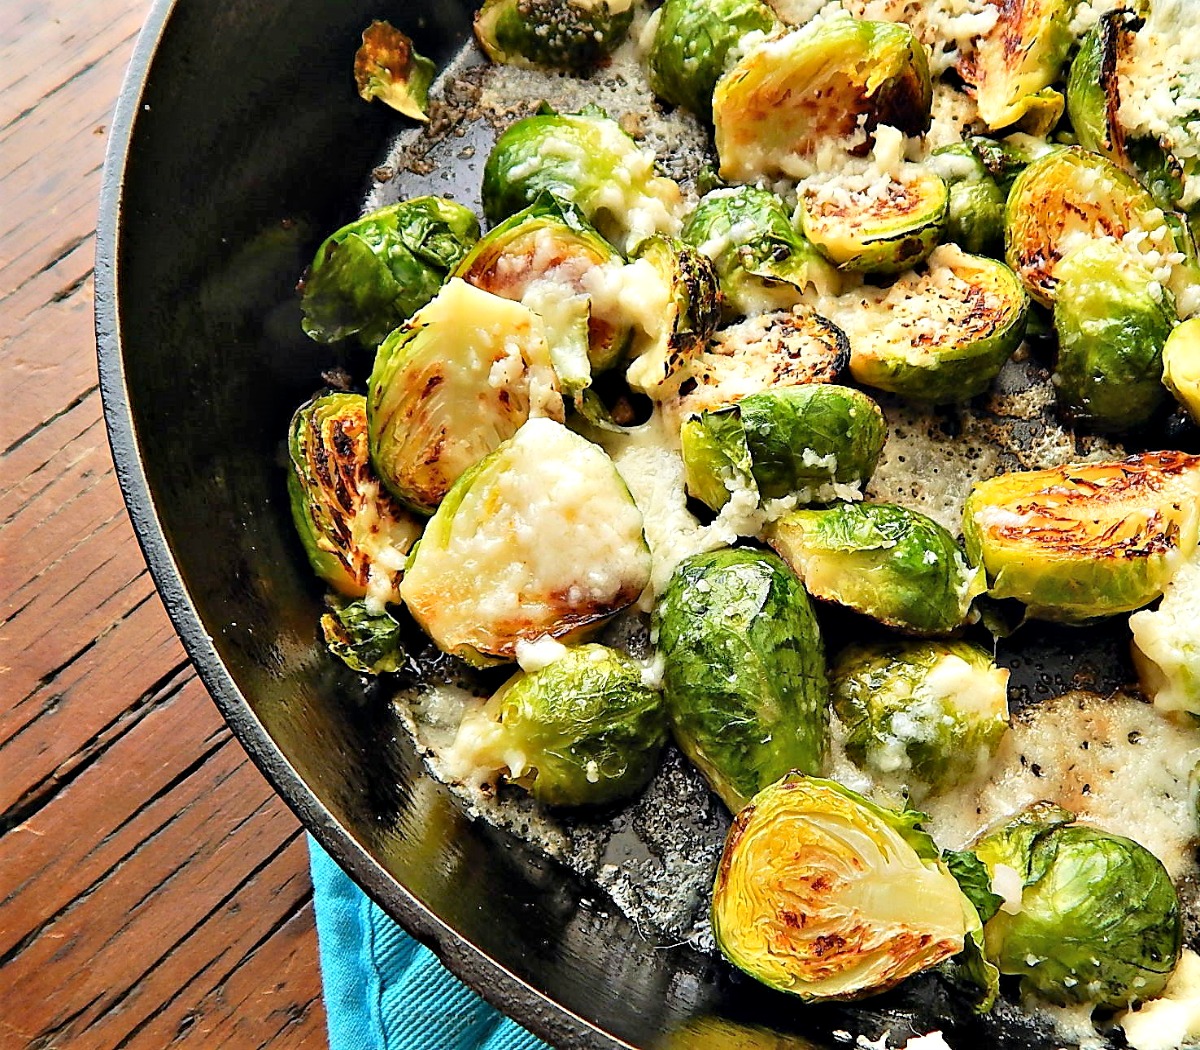 Skillet Roasted Brussels Sprouts with Parmesan Frico